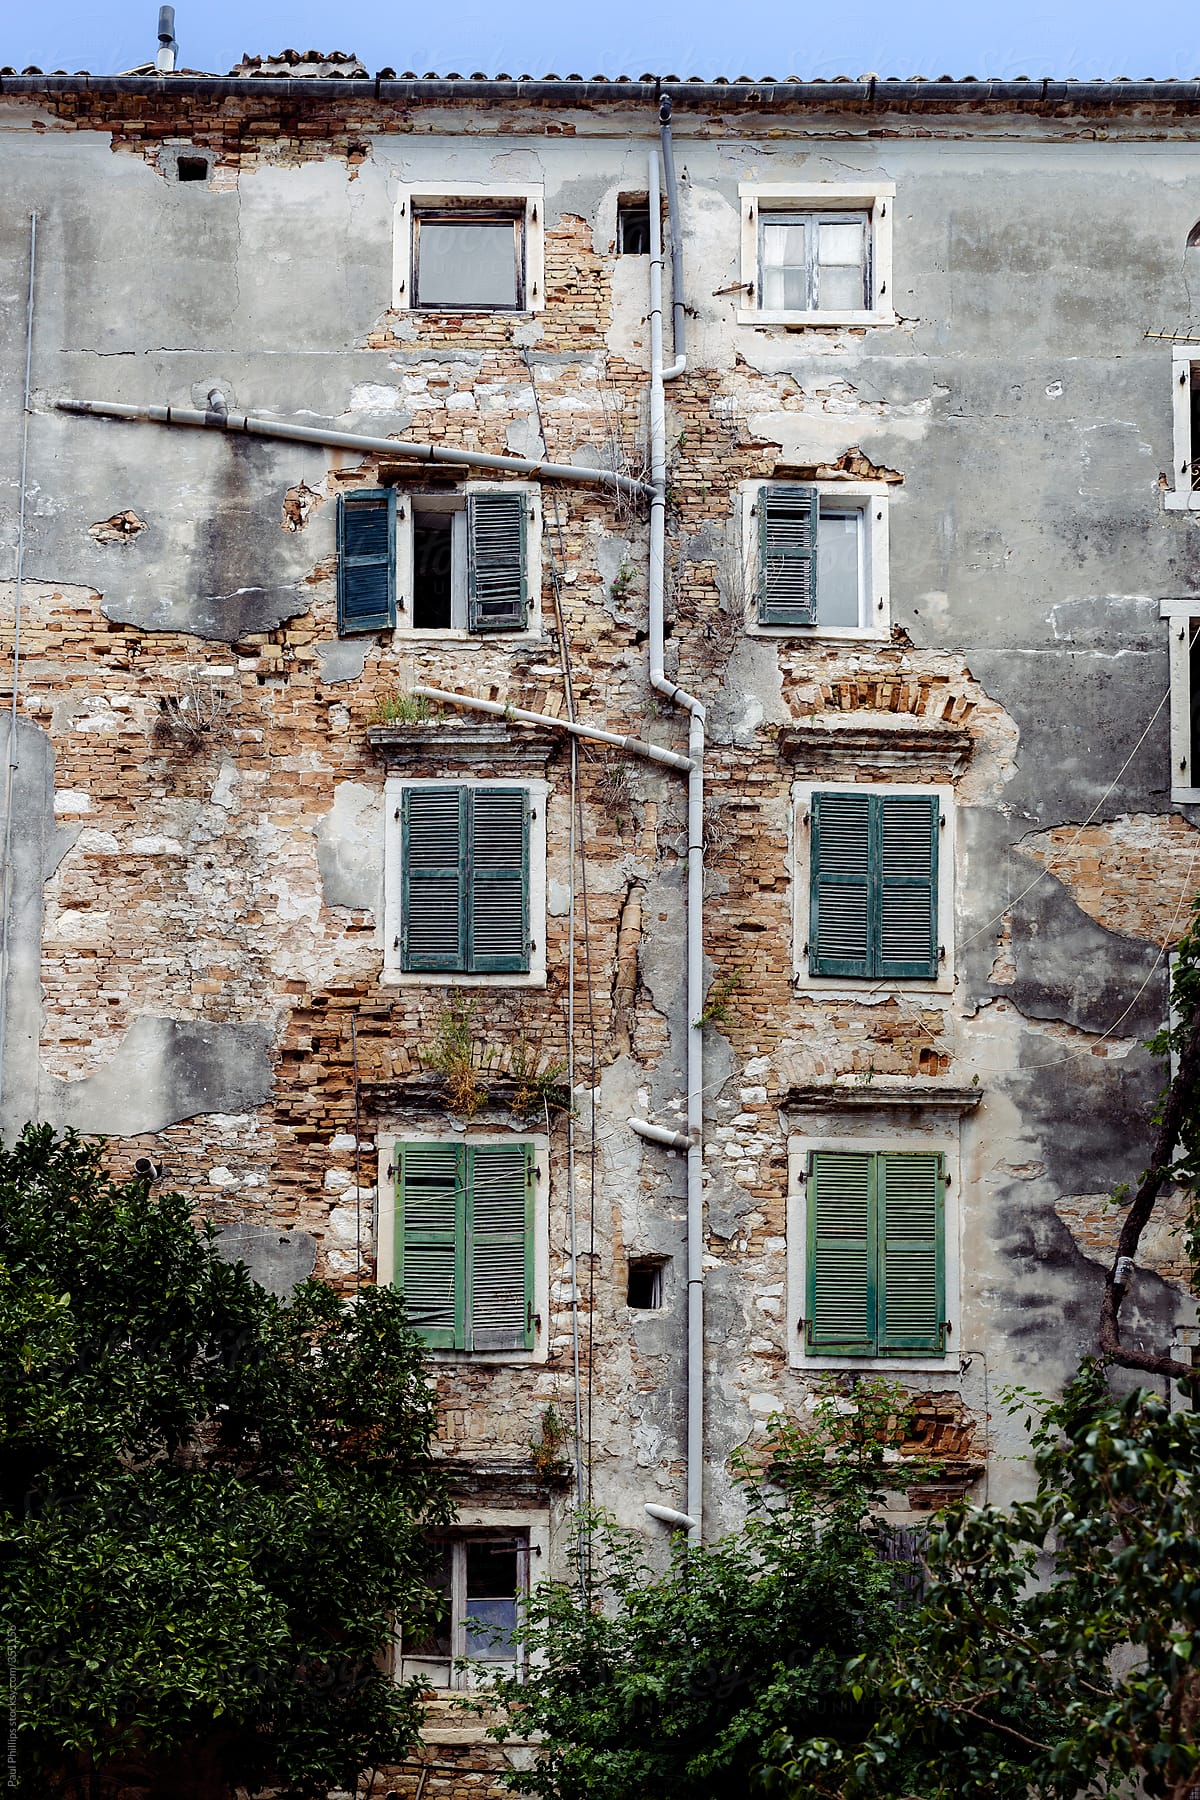 Crumbling exterior of an old Venetian style city building